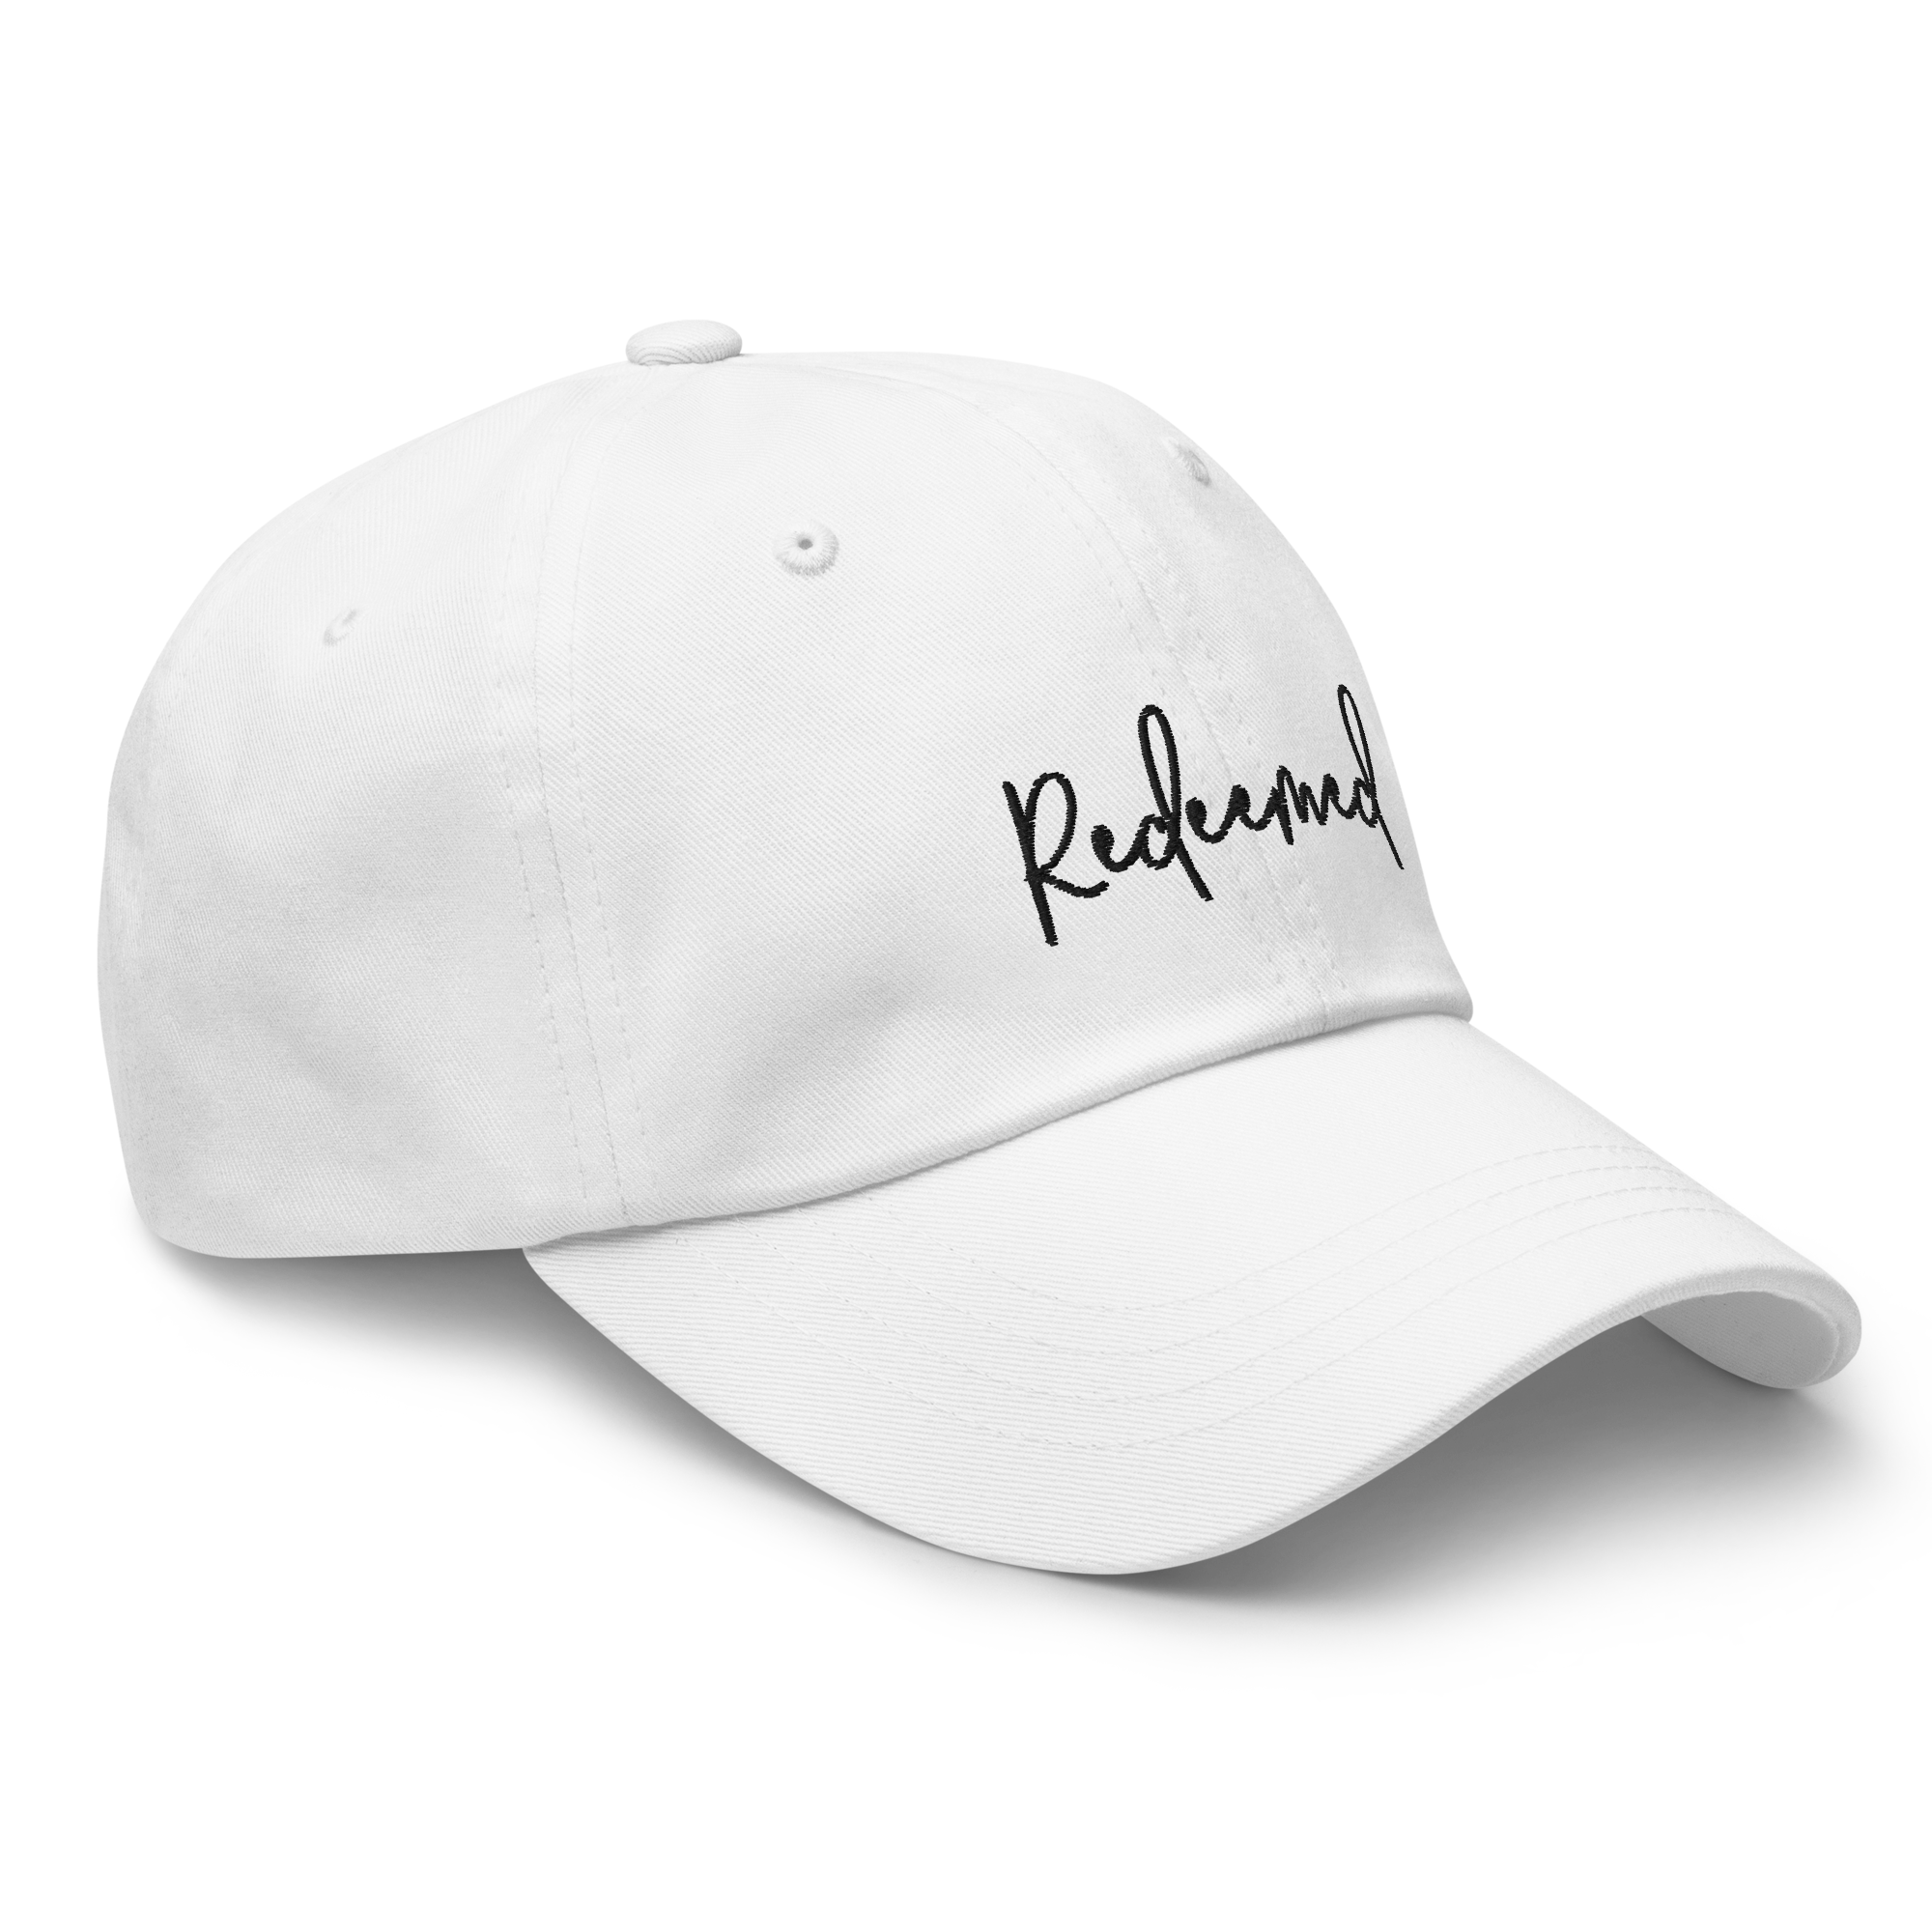 Redeemed (Black Embroidered) Hat